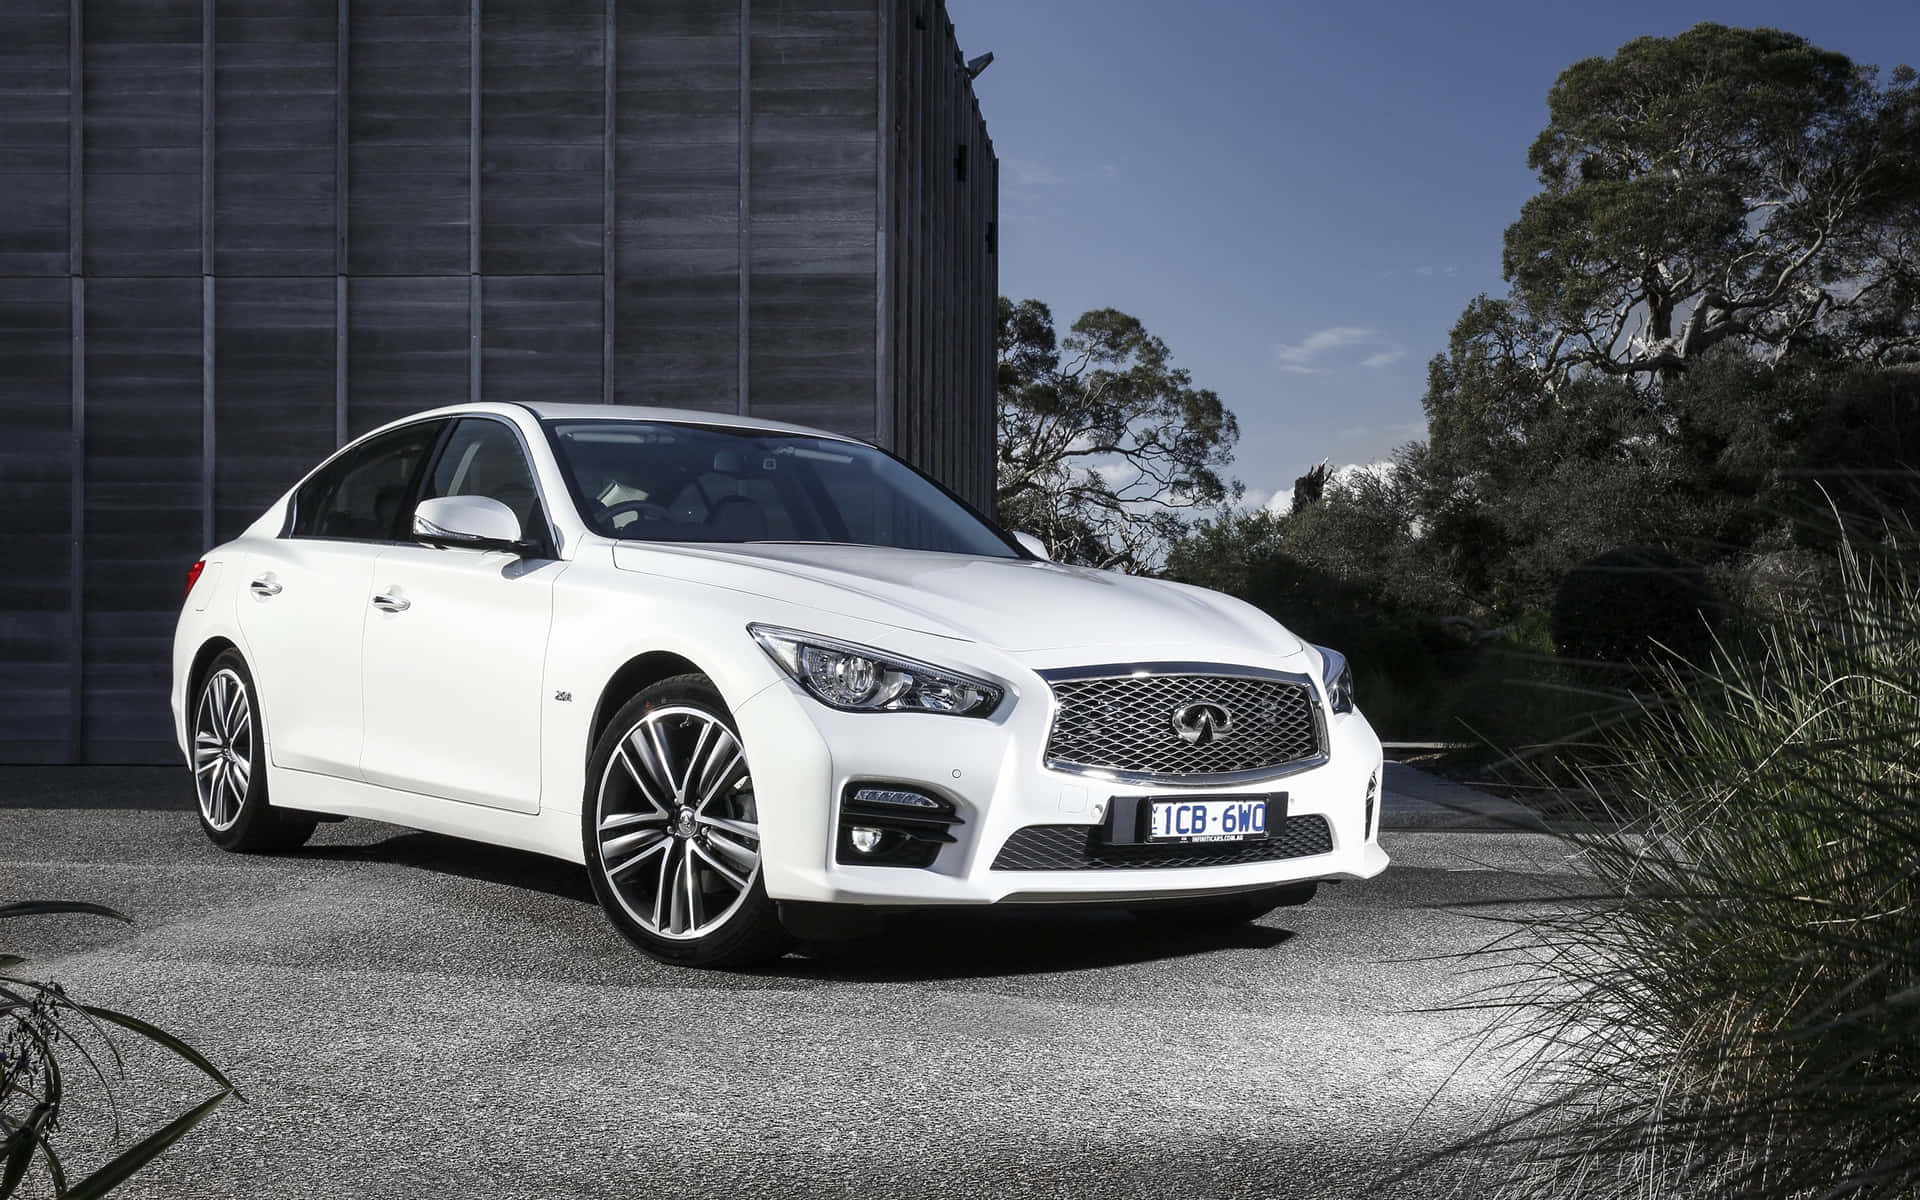 The White Infiniti Q50 Is Parked In Front Of A Building Wallpaper